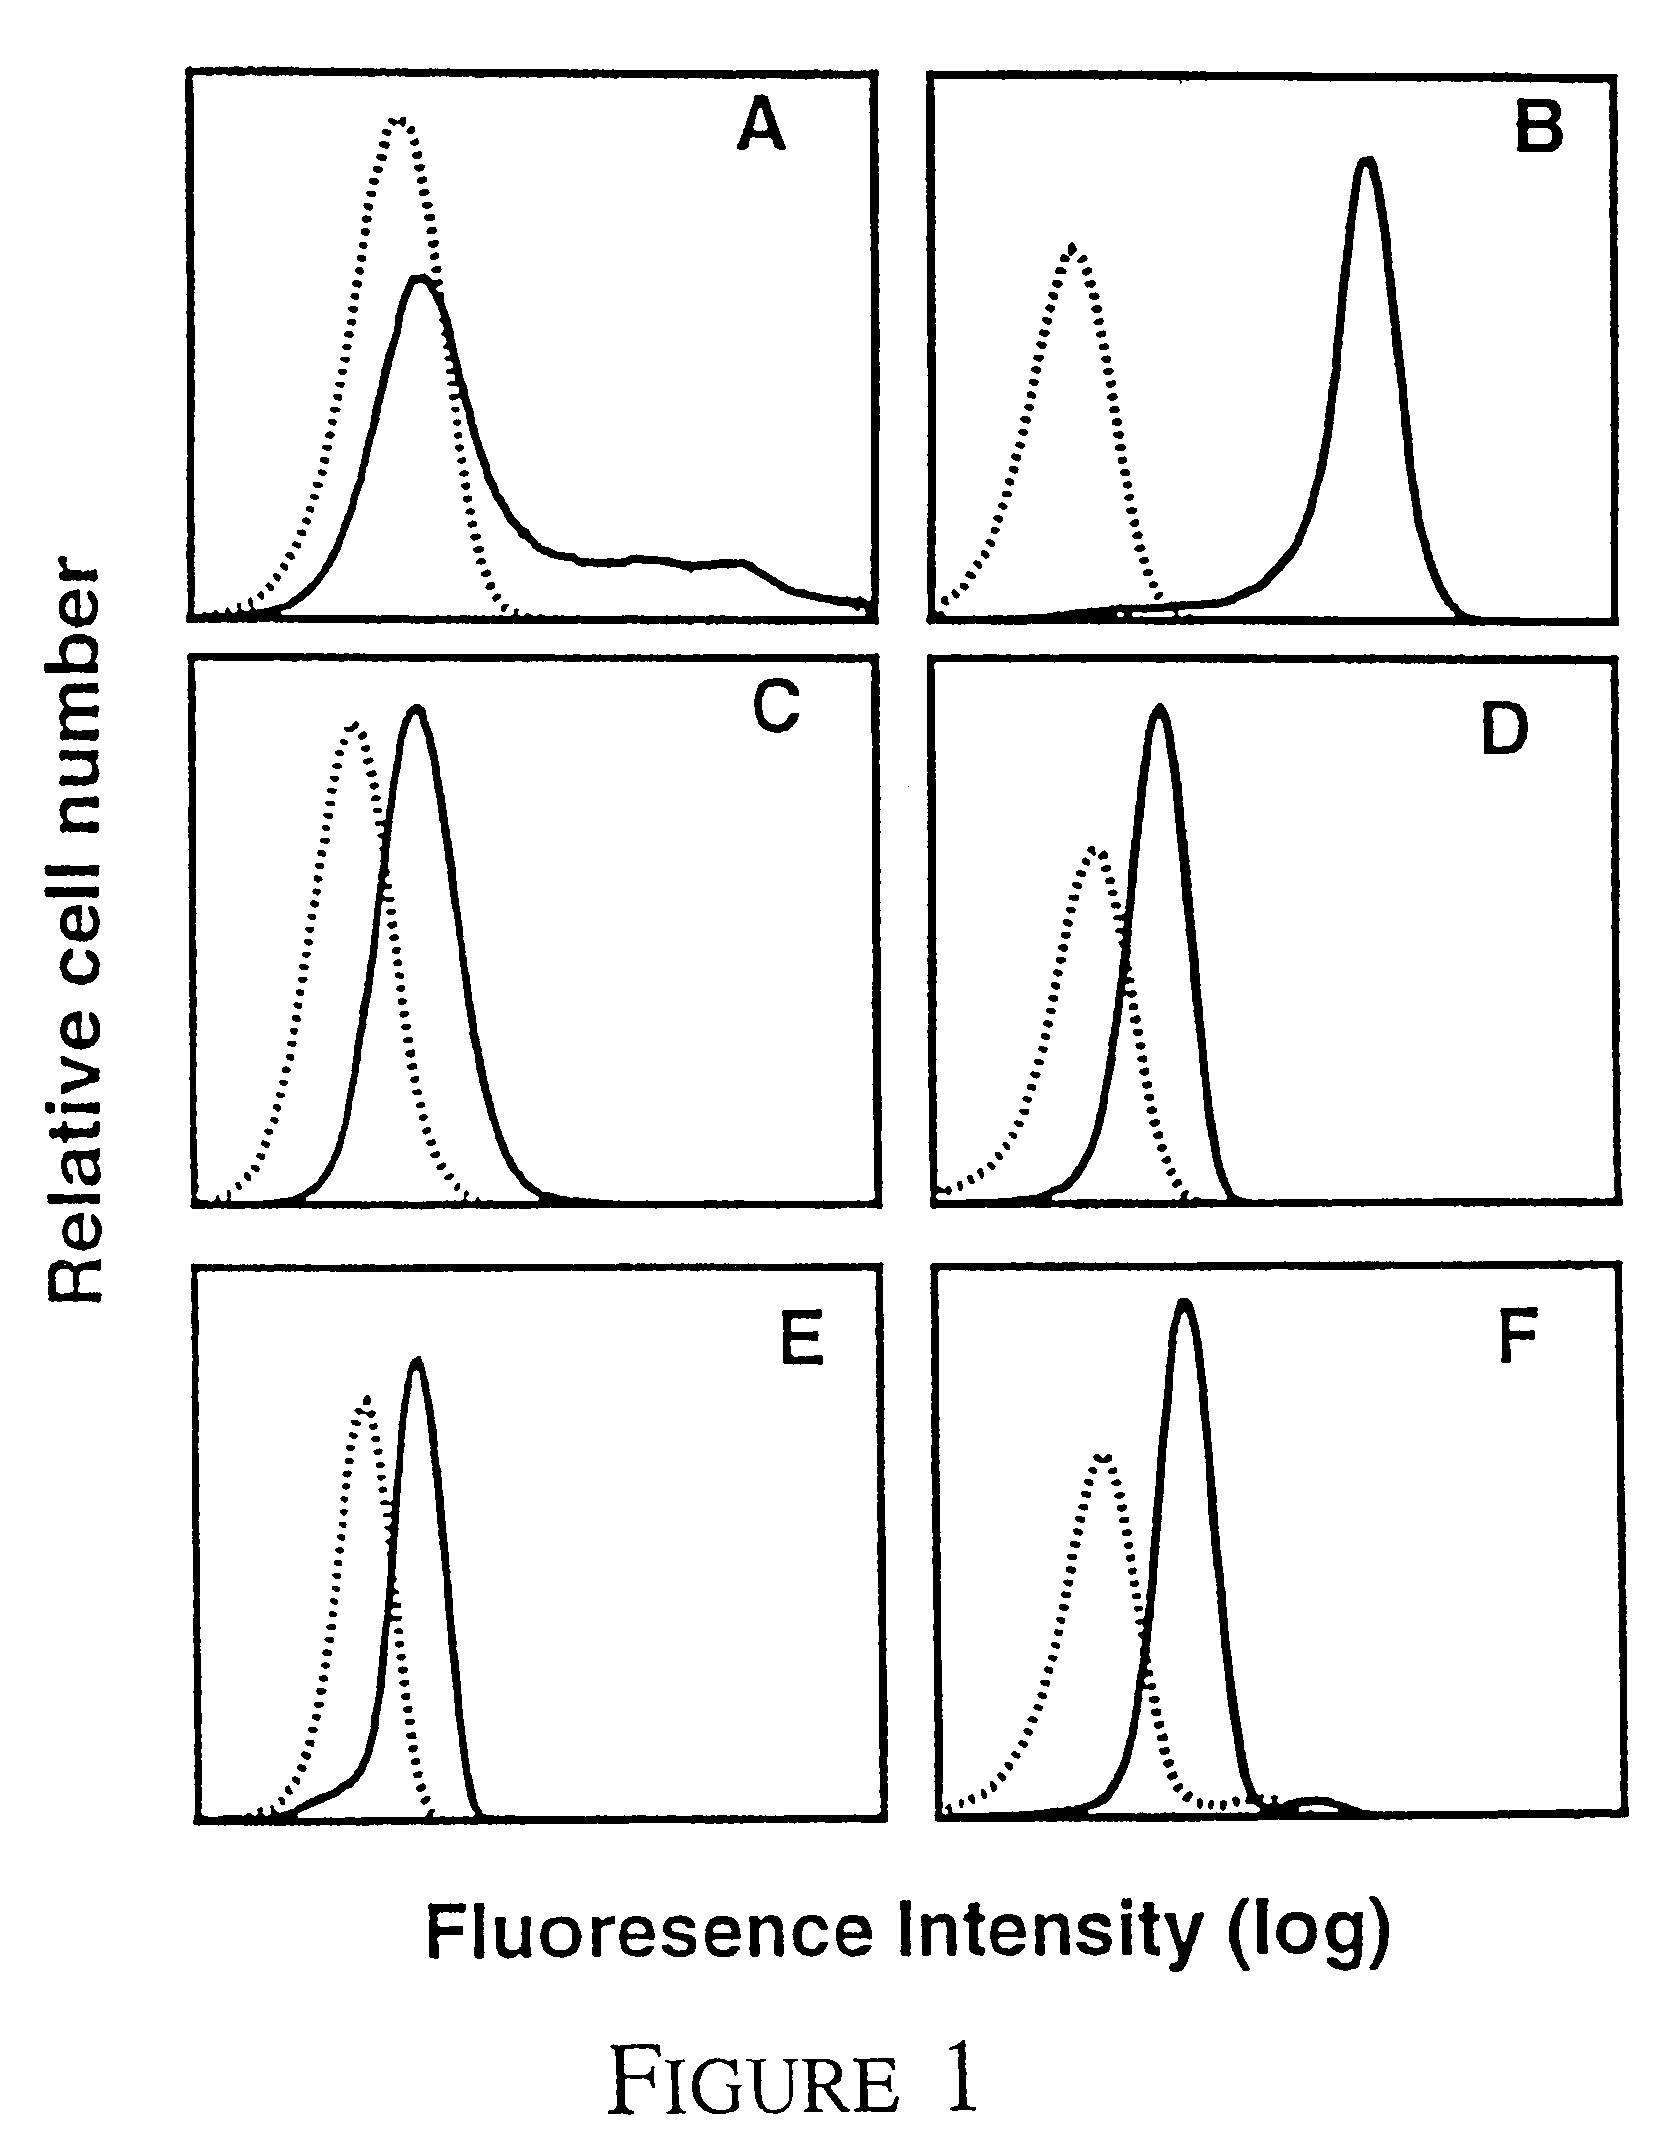 Method of modulating leukemic cell and eosinphil activity with monoclonal antibodies